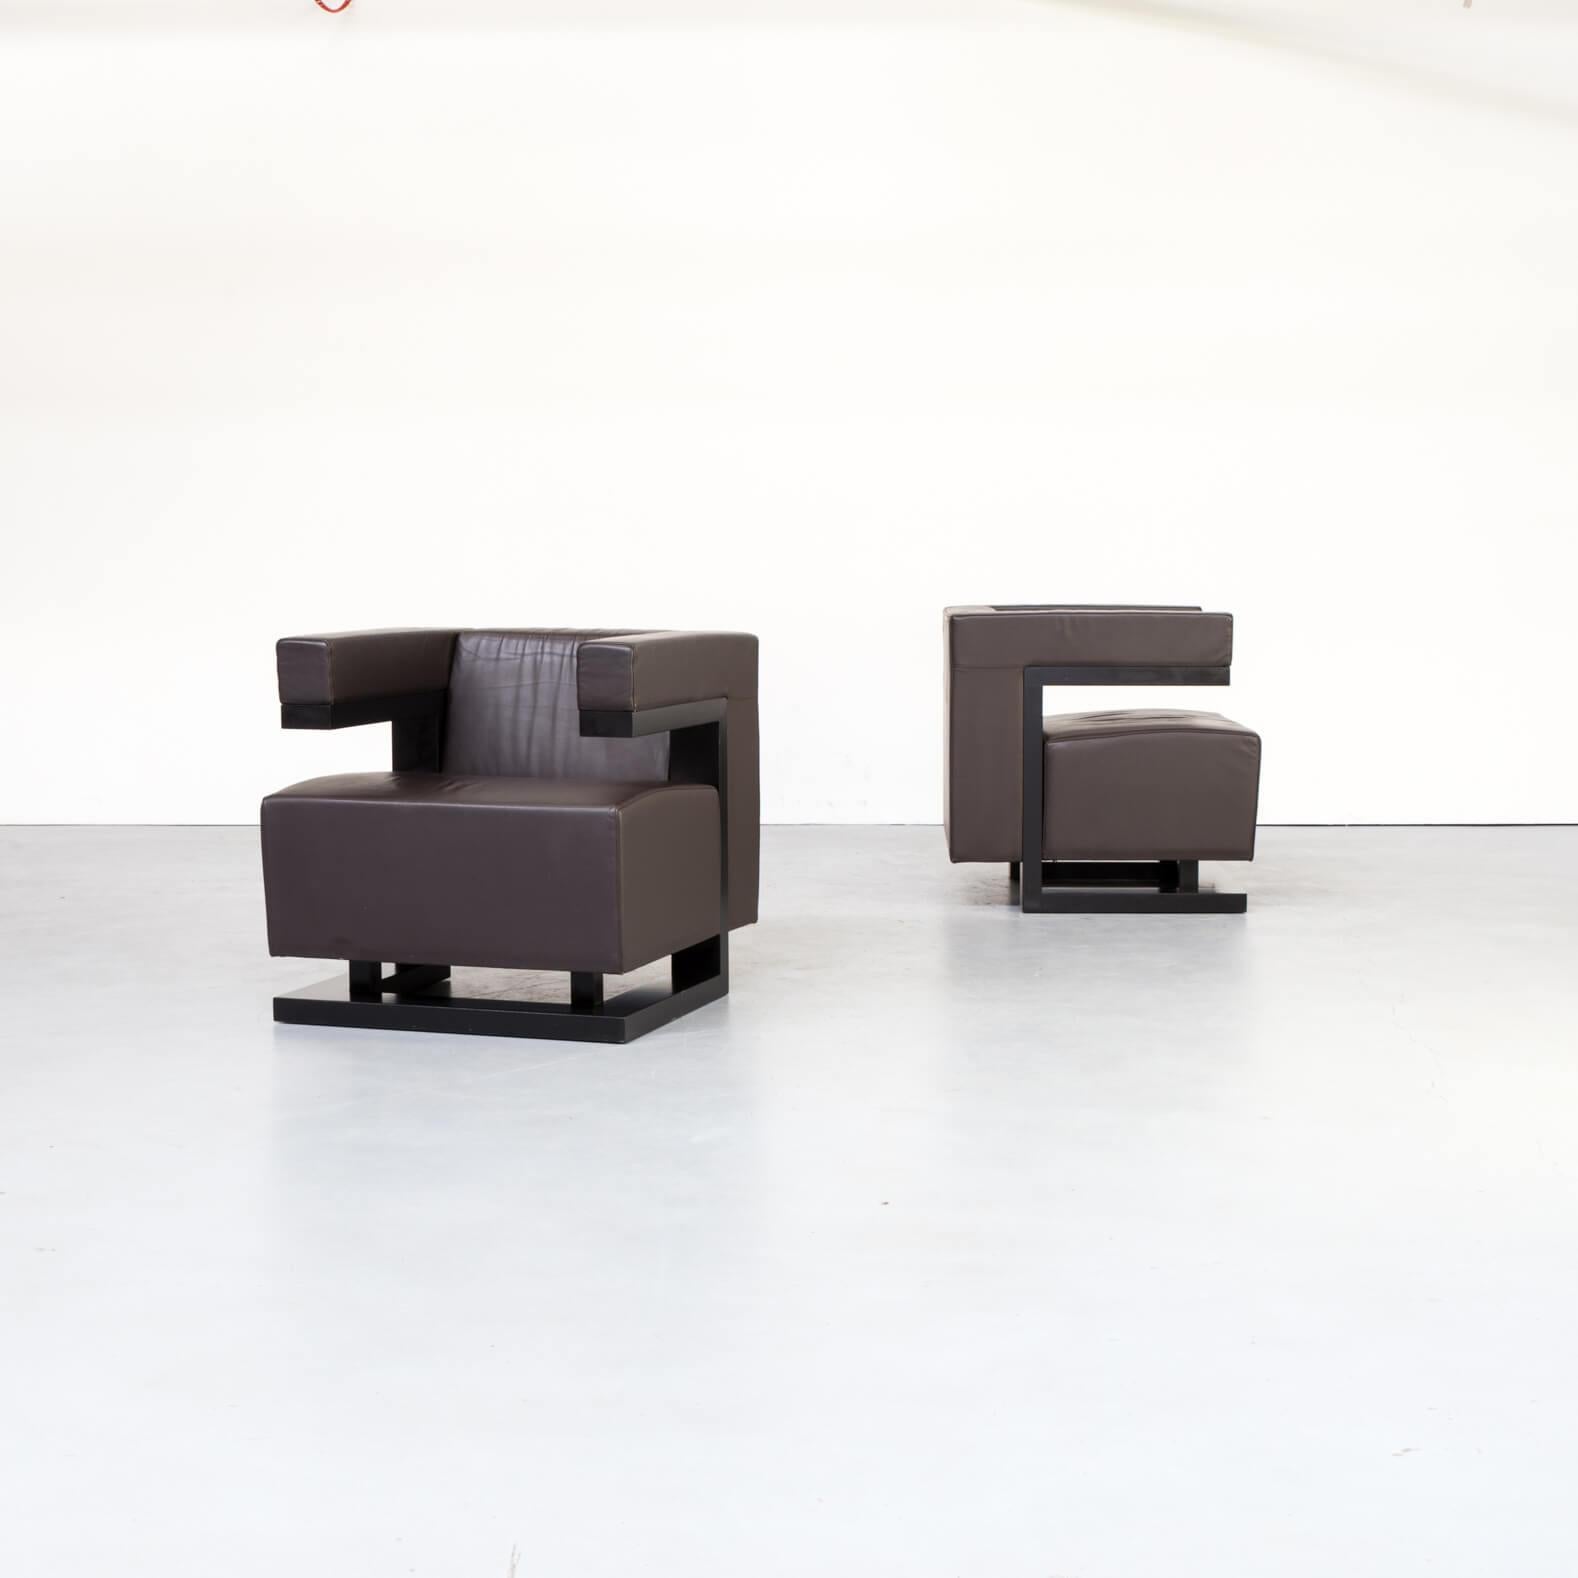 One set of two Walter Gropius ‘F51 armchair’ for Tecta. The F51 shows a lot of comfort in square form, a quality in design directly te result of drawing buildings which Gropius made as well known as with his furniture designs. This set is unique and